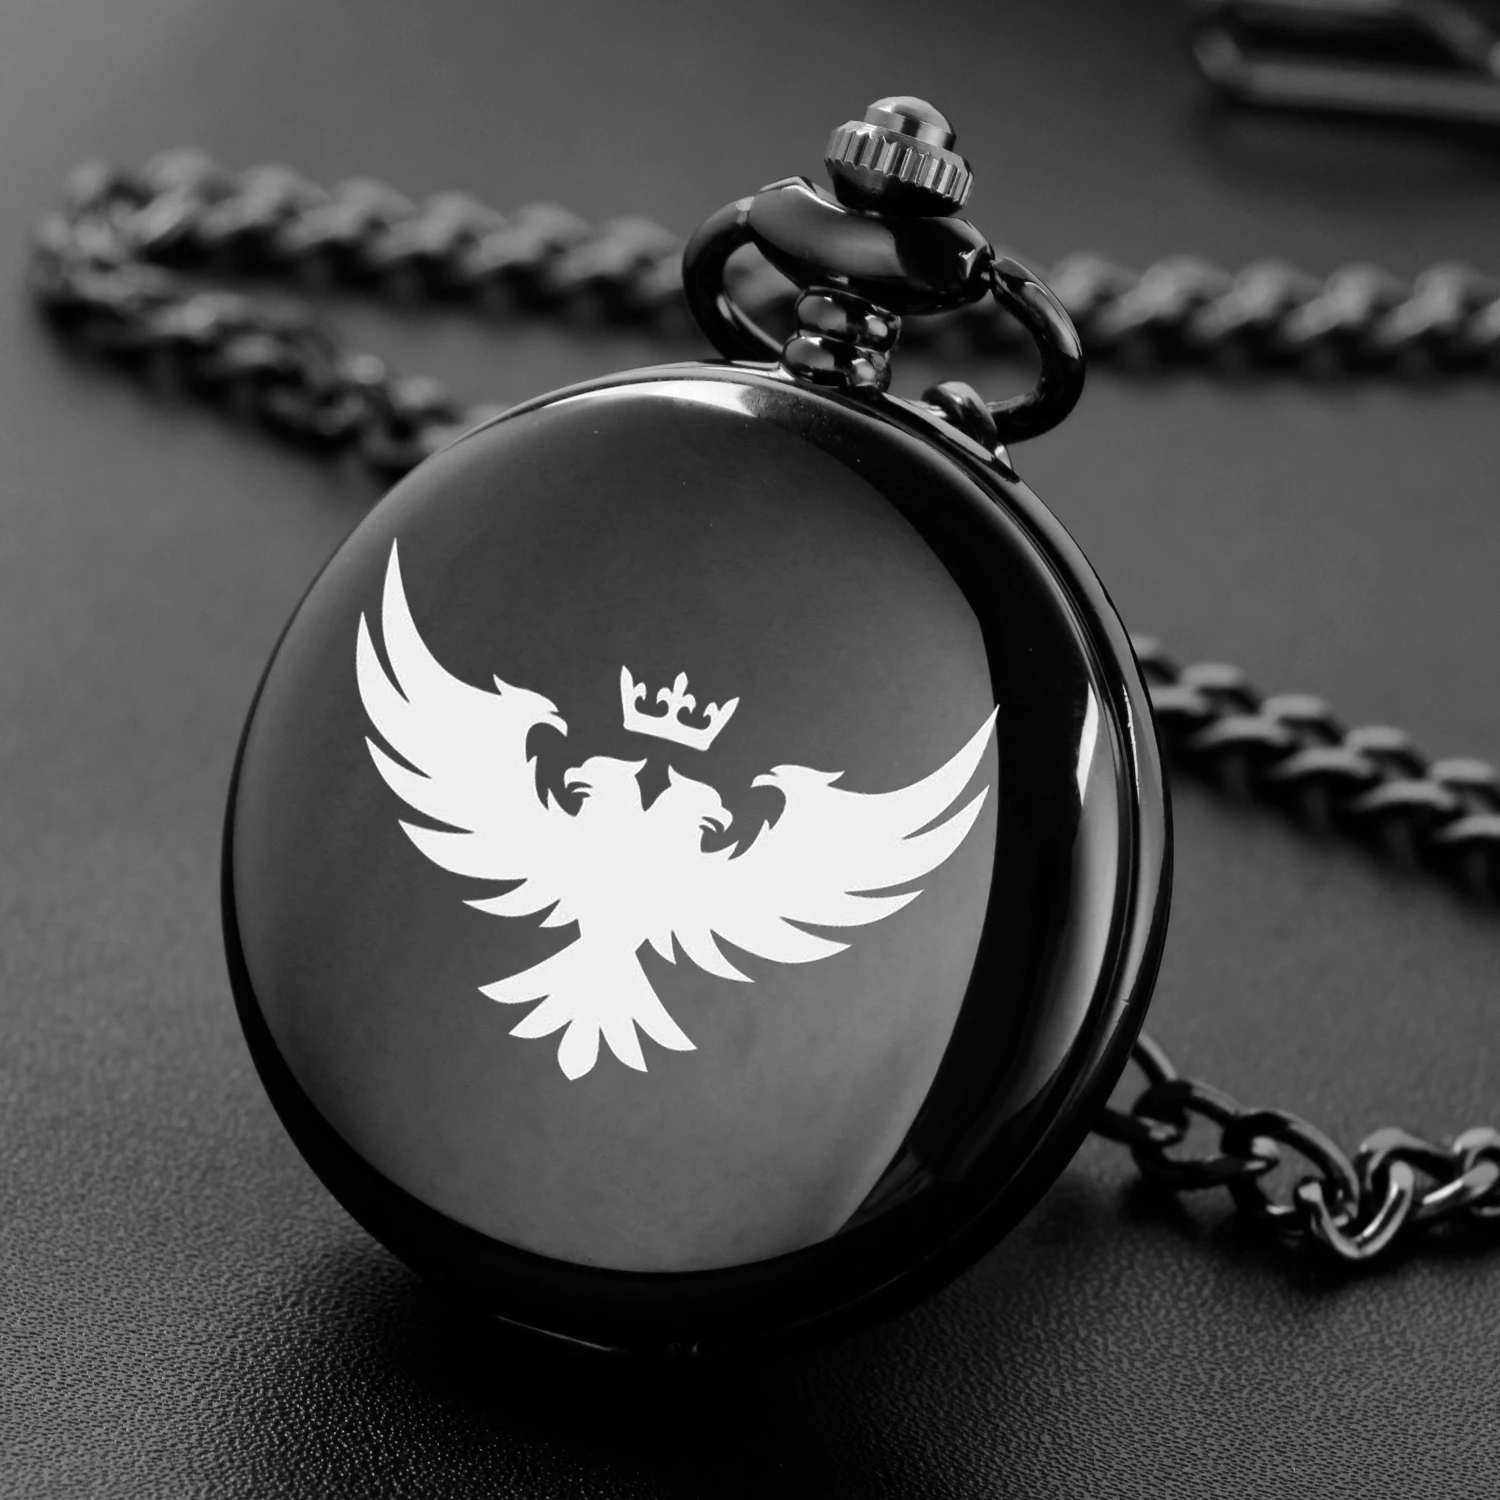 

The two-headed bird King cool design carving english alphabet face pocket watch a belt chain Black quartz watch perfect gift